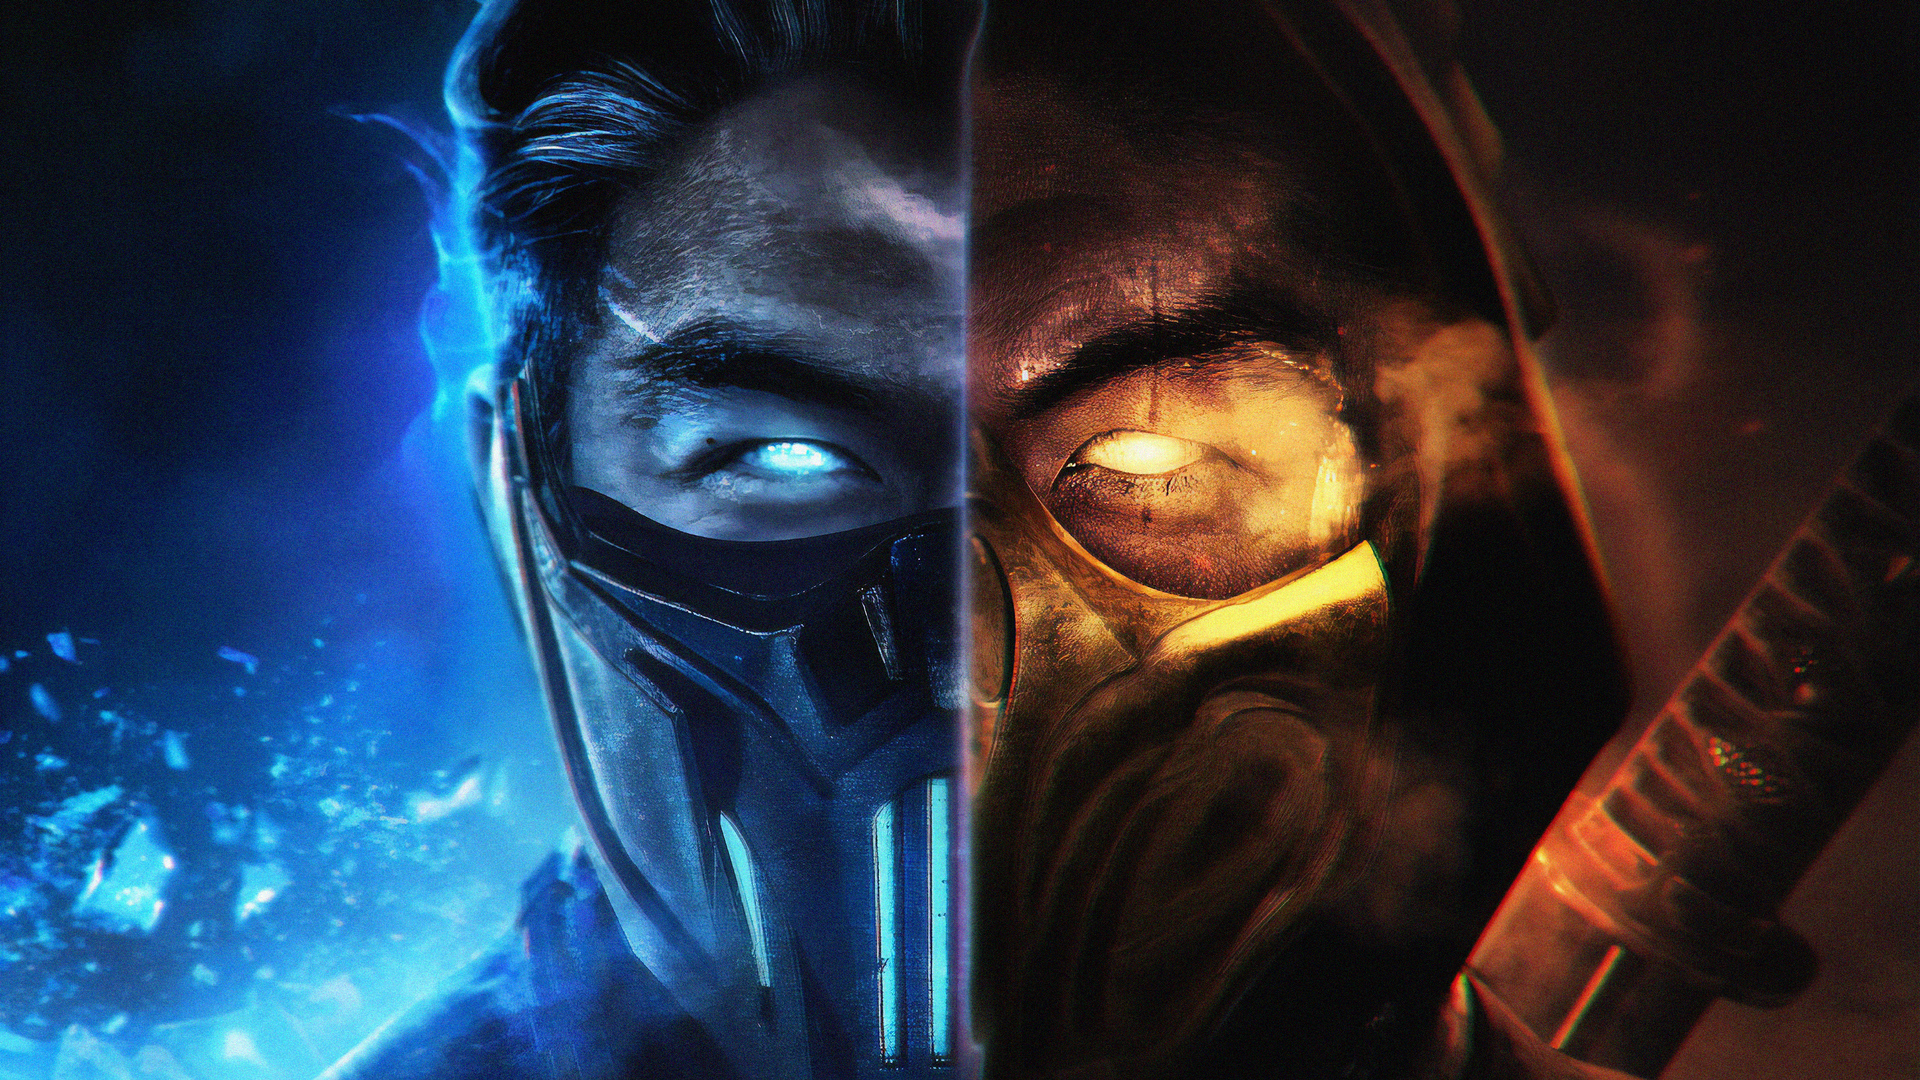 1920x1080 MORTAL KOMBAT SUBZERO AND SCORPION Laptop Full HD 1080P HD 4k Wallpapers, Images, Backgrounds, Photos and Pictures